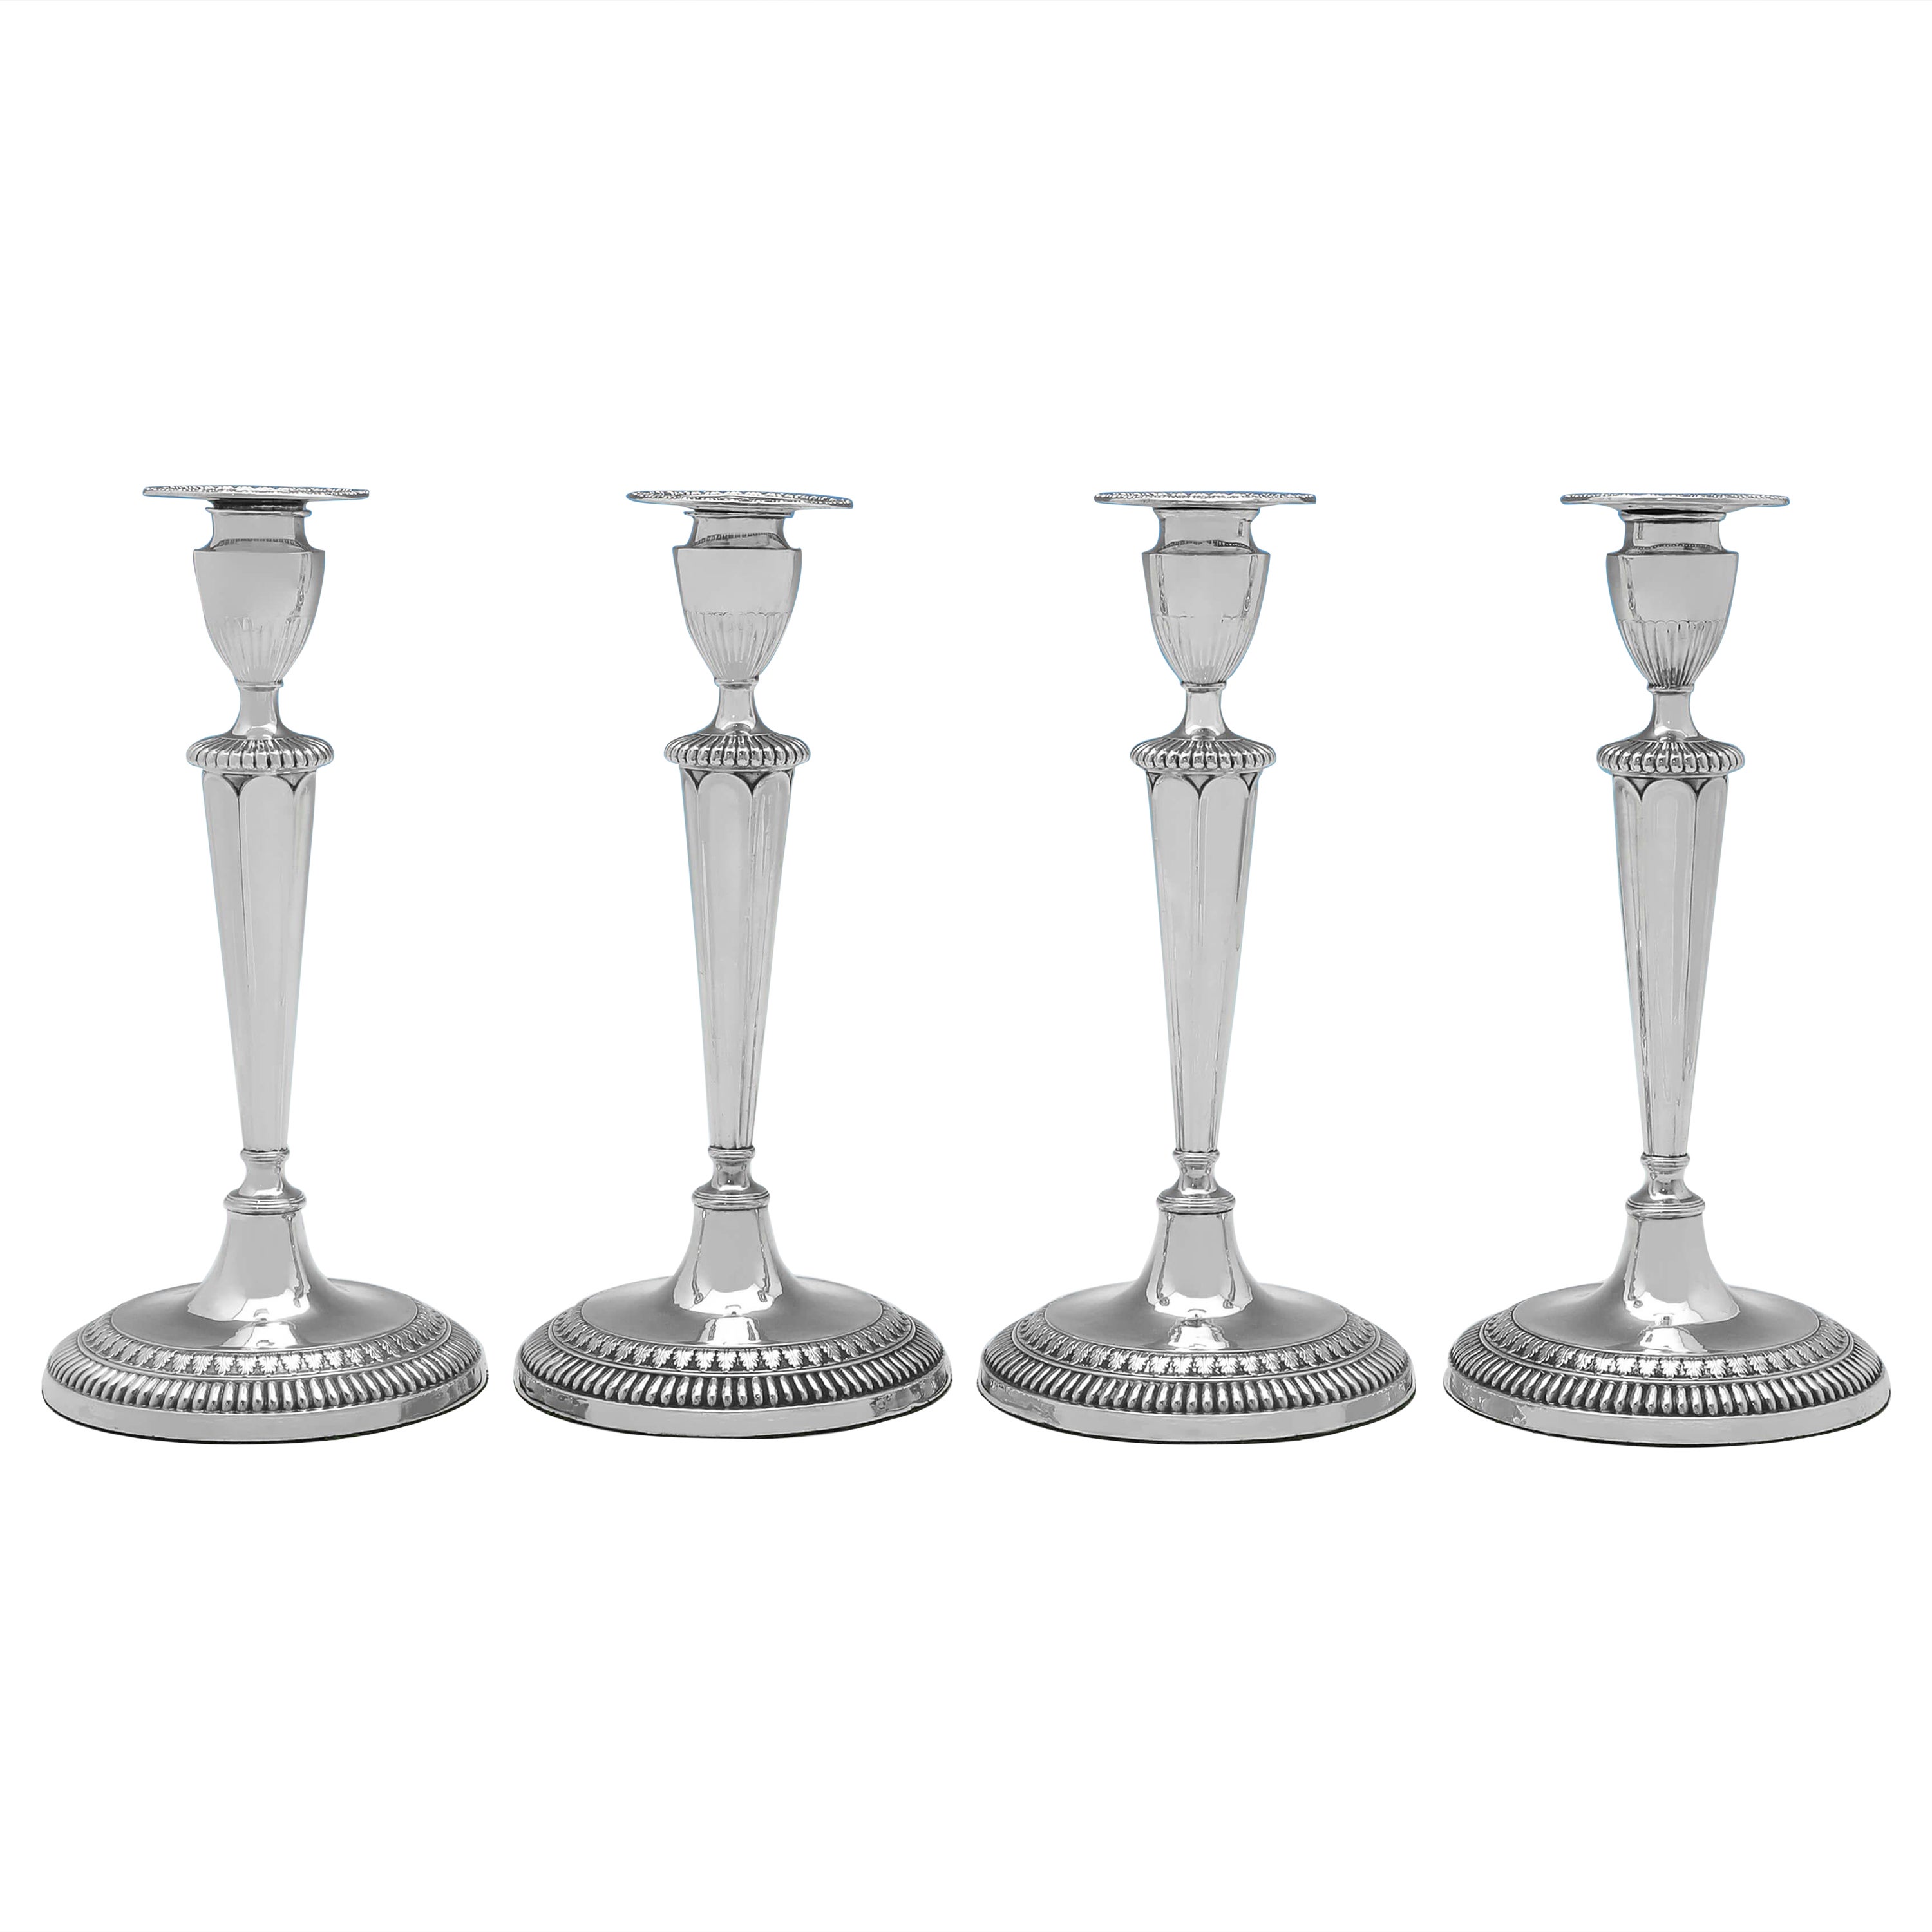 Wonderful Neoclassical Set of 4 Old Sheffield Candlesticks - Circa 1790  For Sale